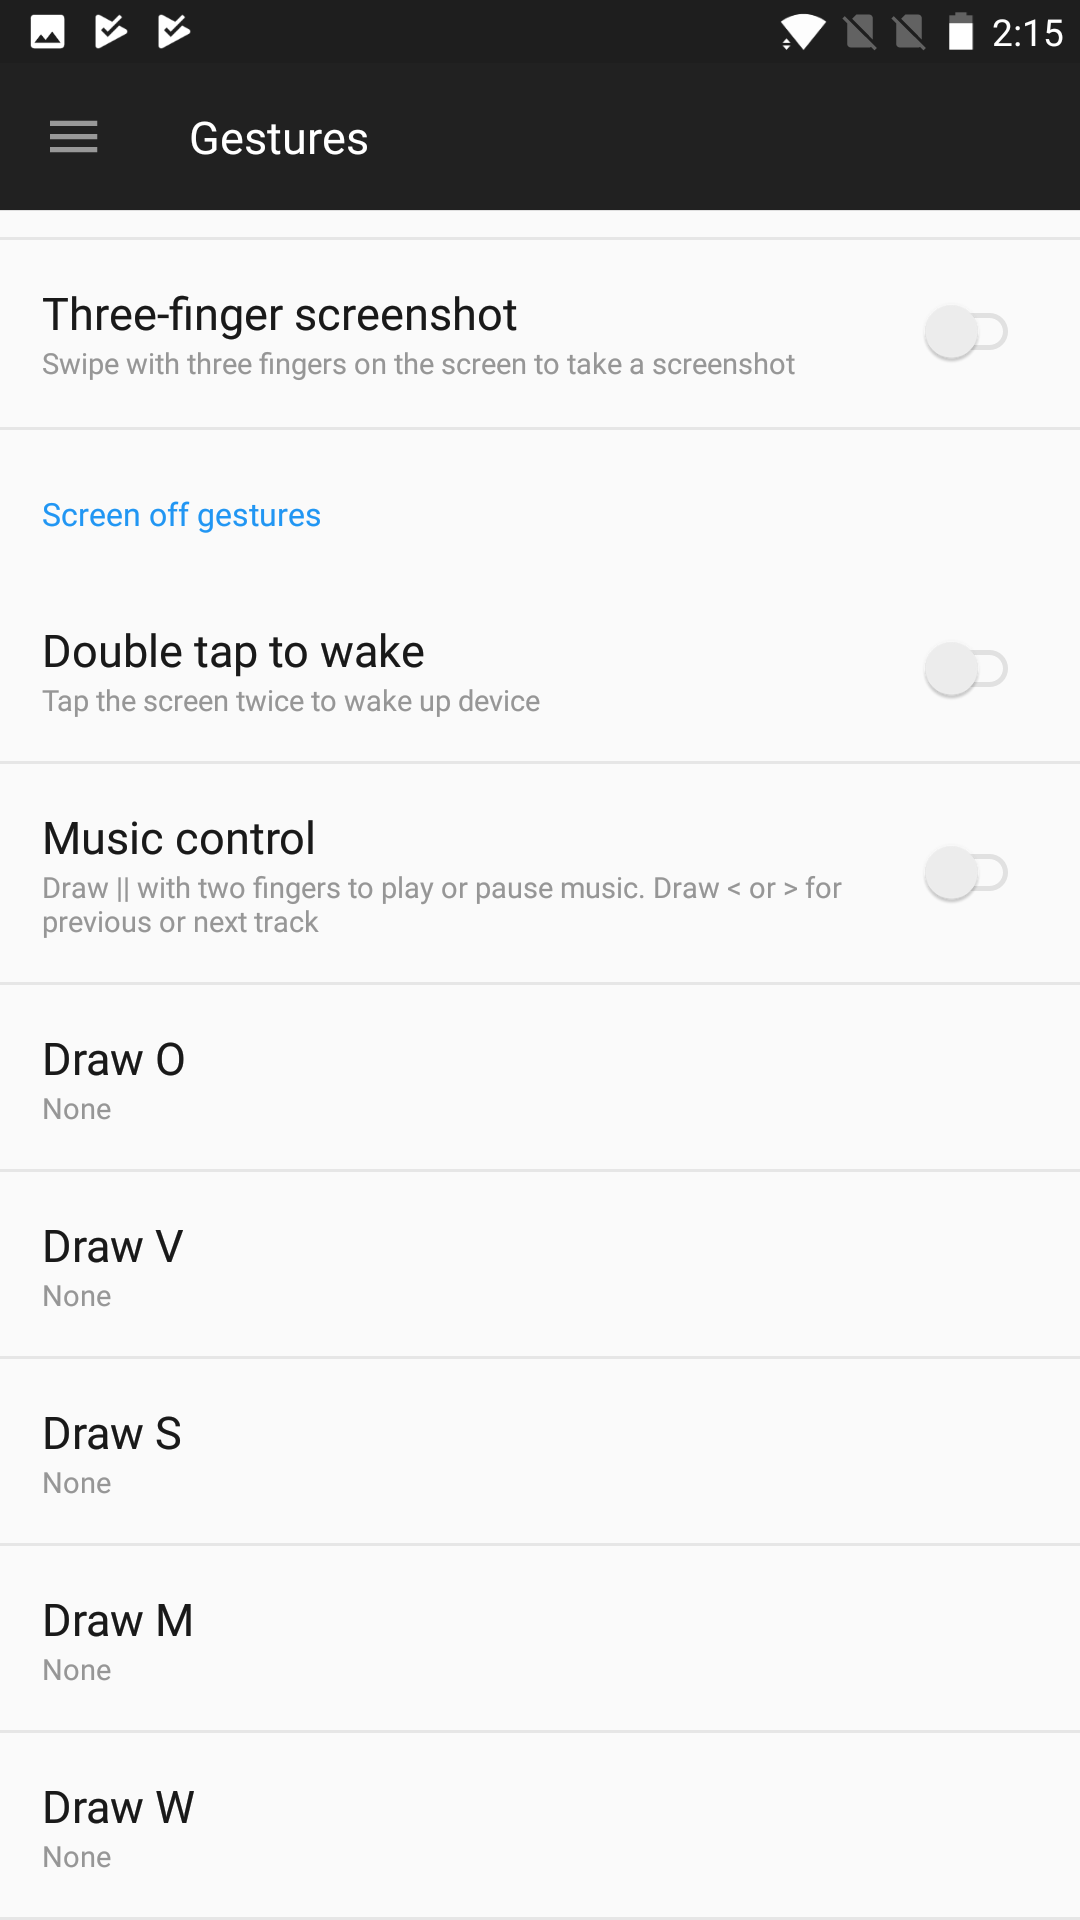 Screen-off gestures on a OnePlus smartphone.